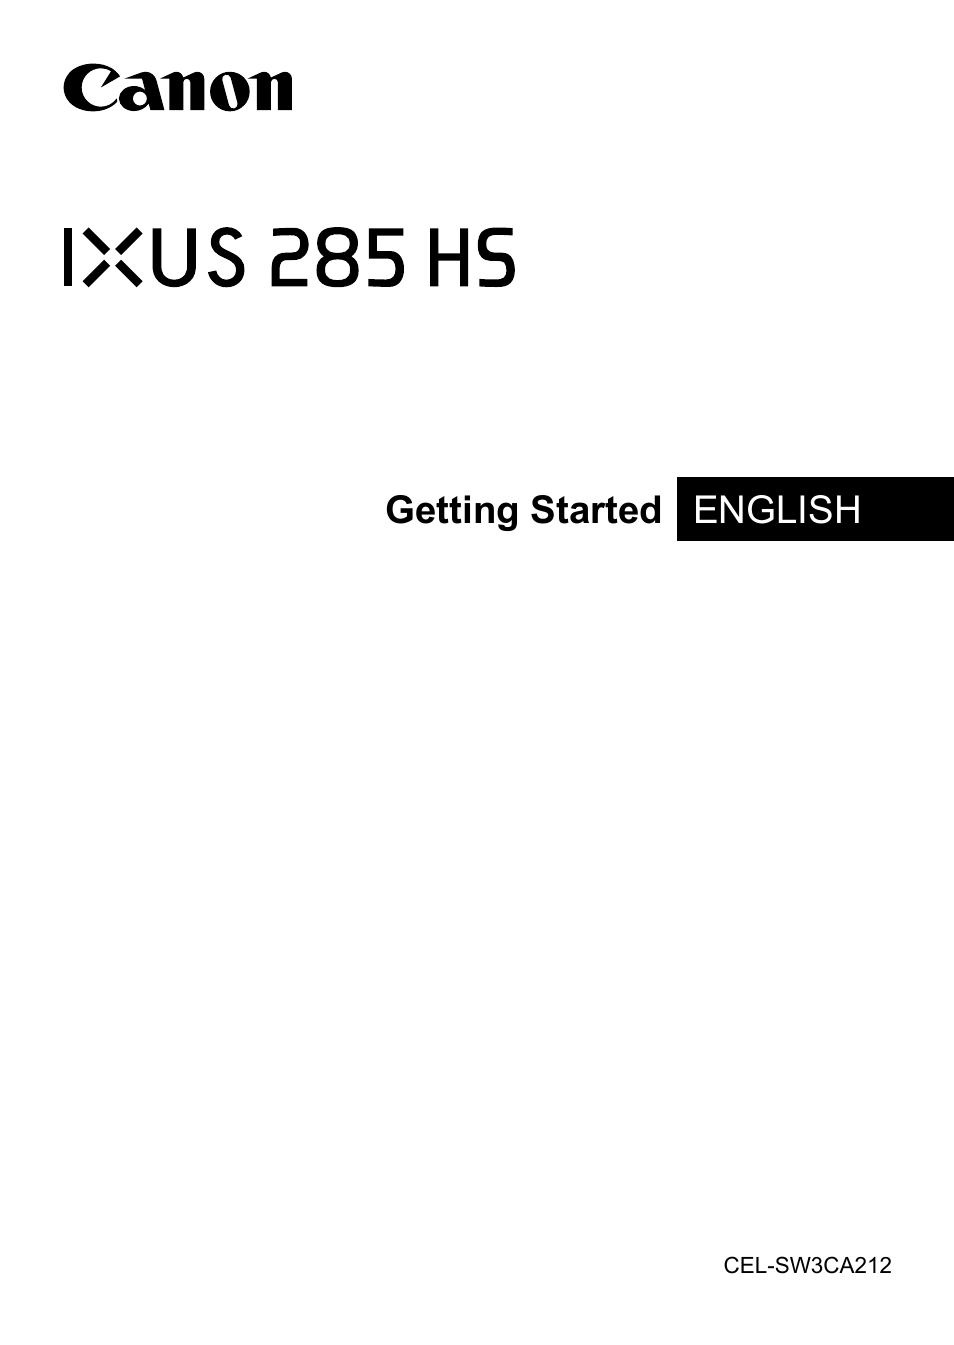 Canon IXUS 285 HS User Manual | 11 pages